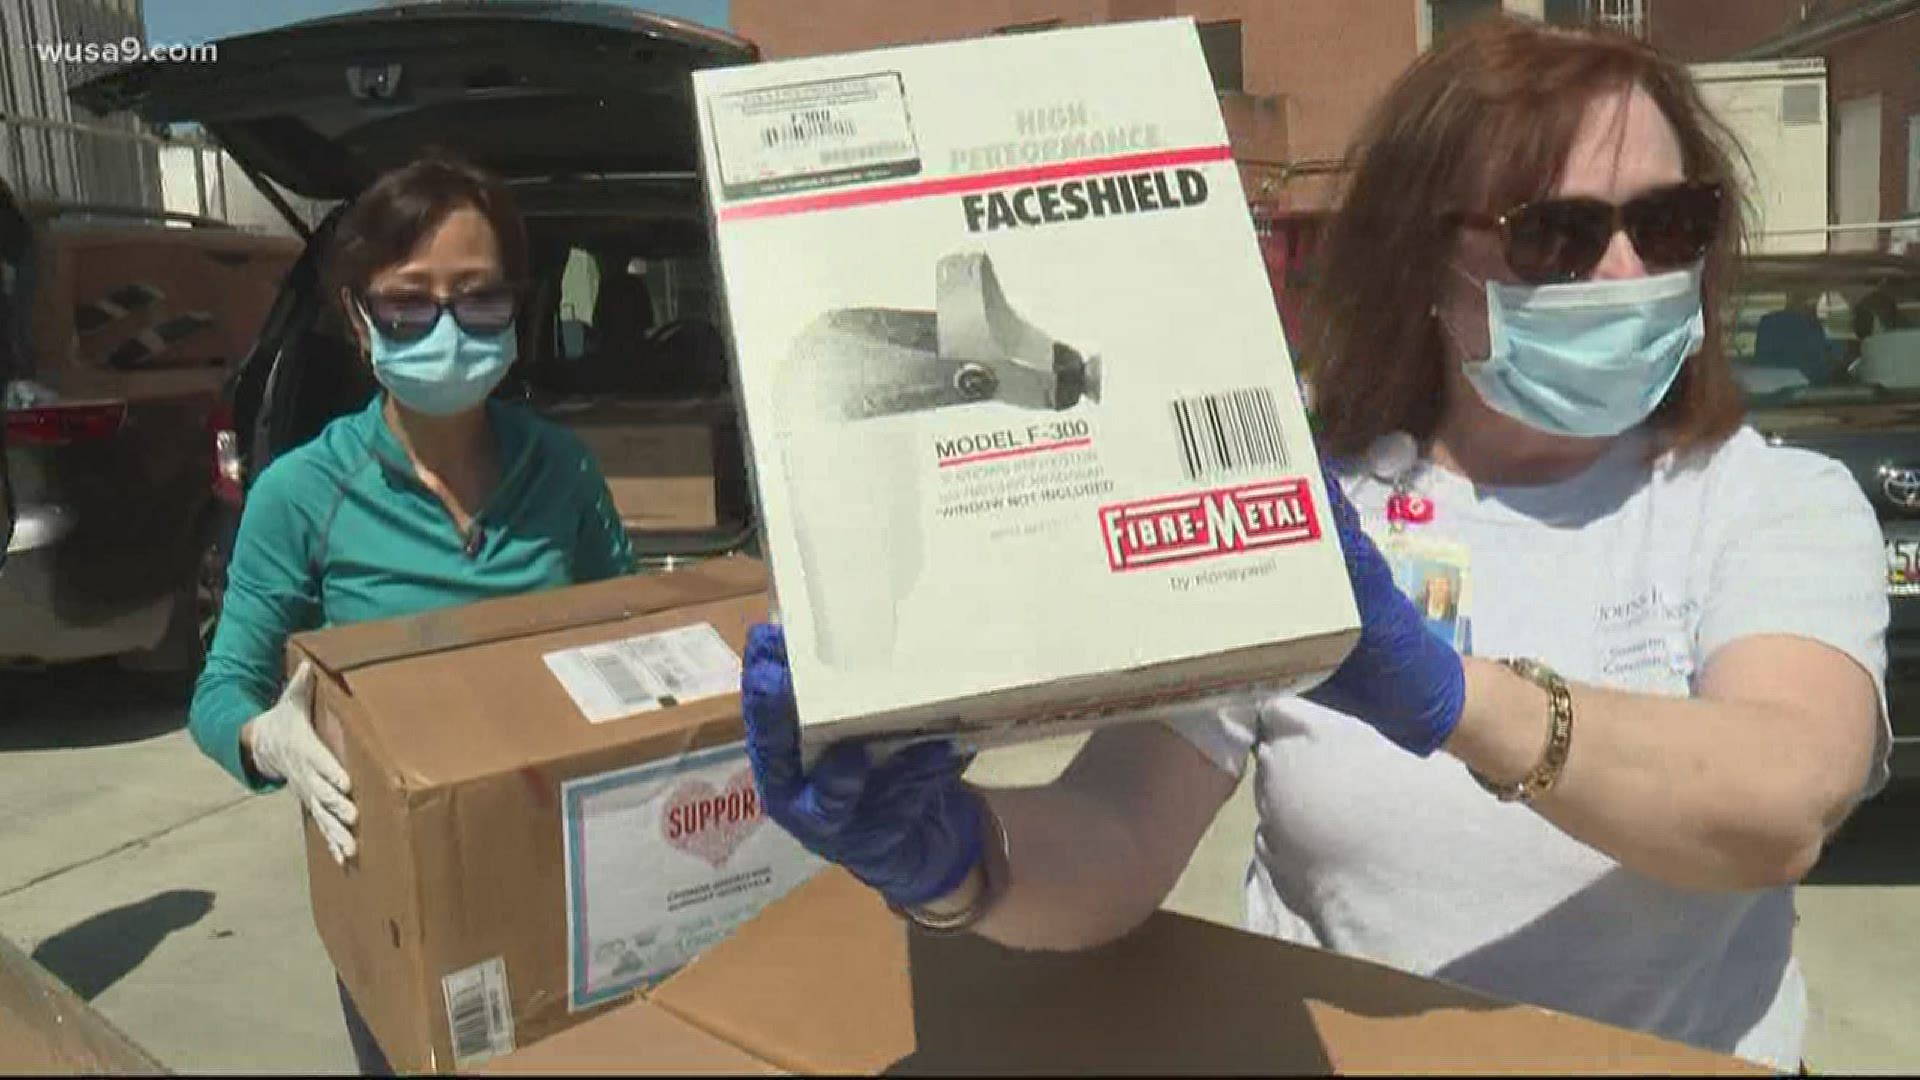 The scientists who are from the FDA called Chinese American Support Hospitals (CASH) donated a large supply of protective equipment to hospitals on Monday.